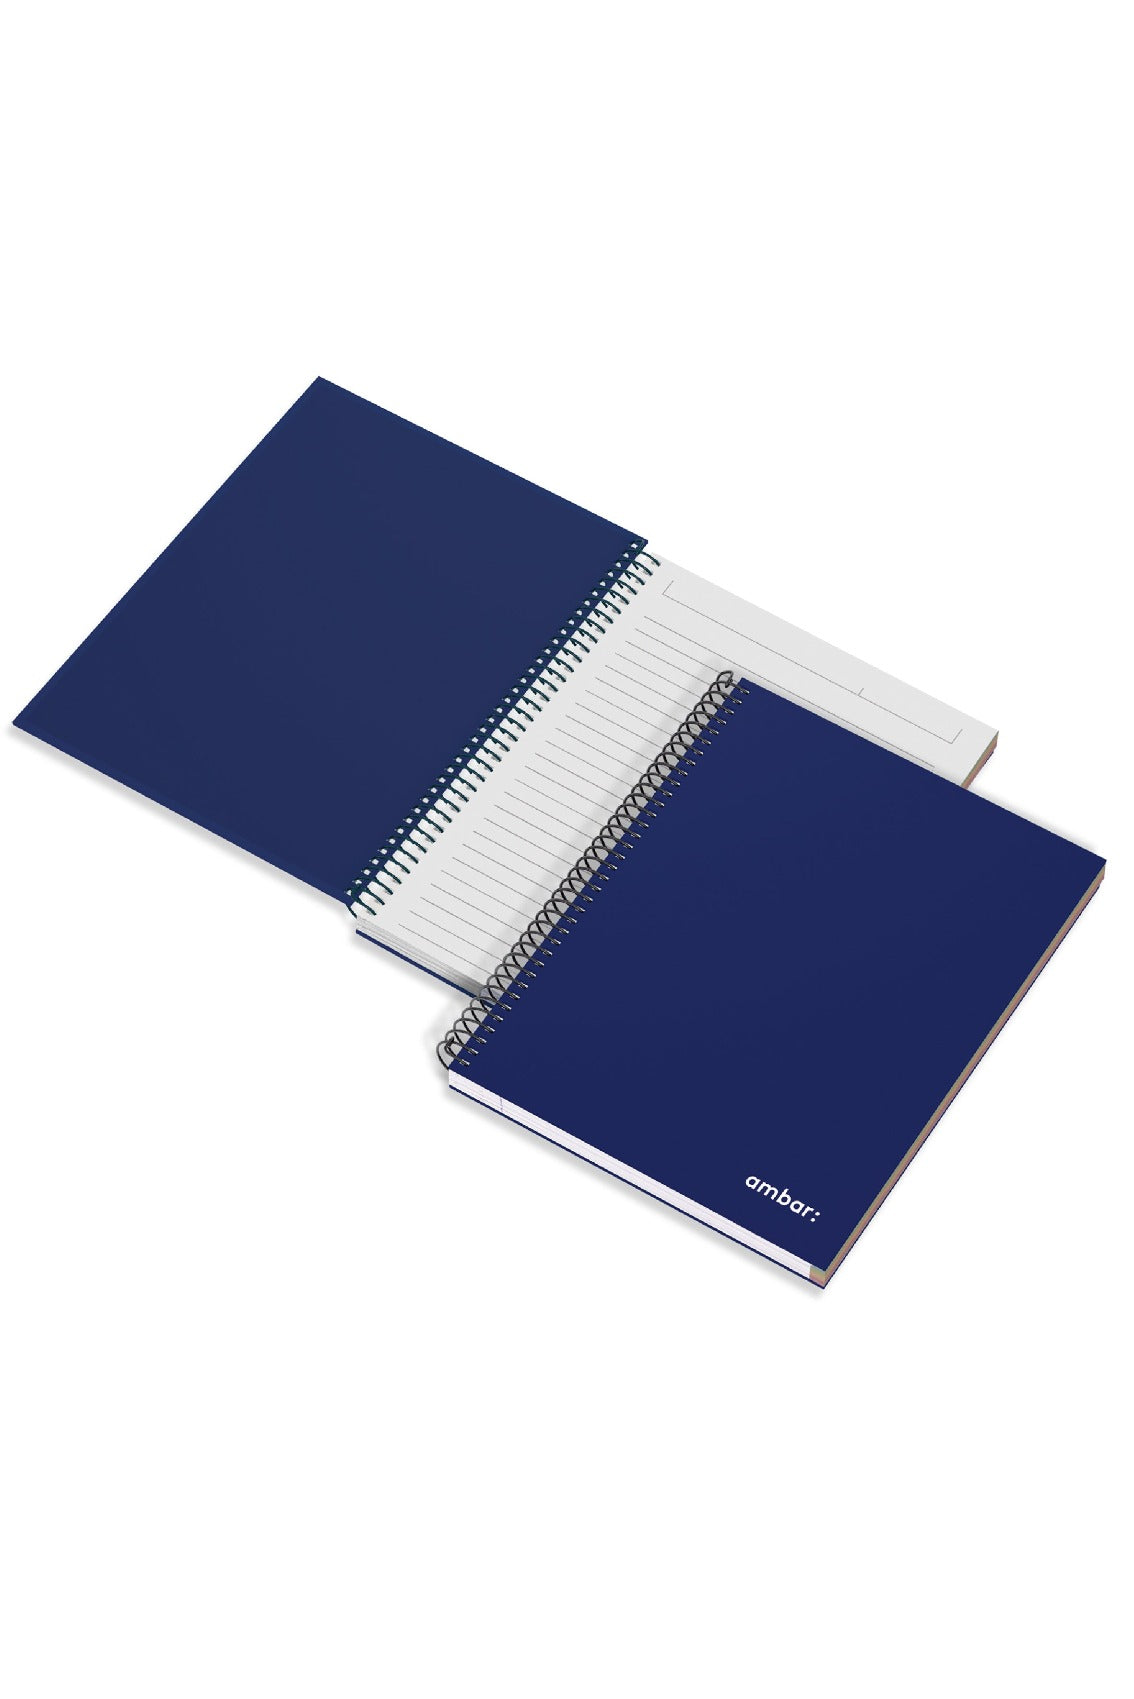 A5 Hardcover Spiral Book Ambar Blue Lined 